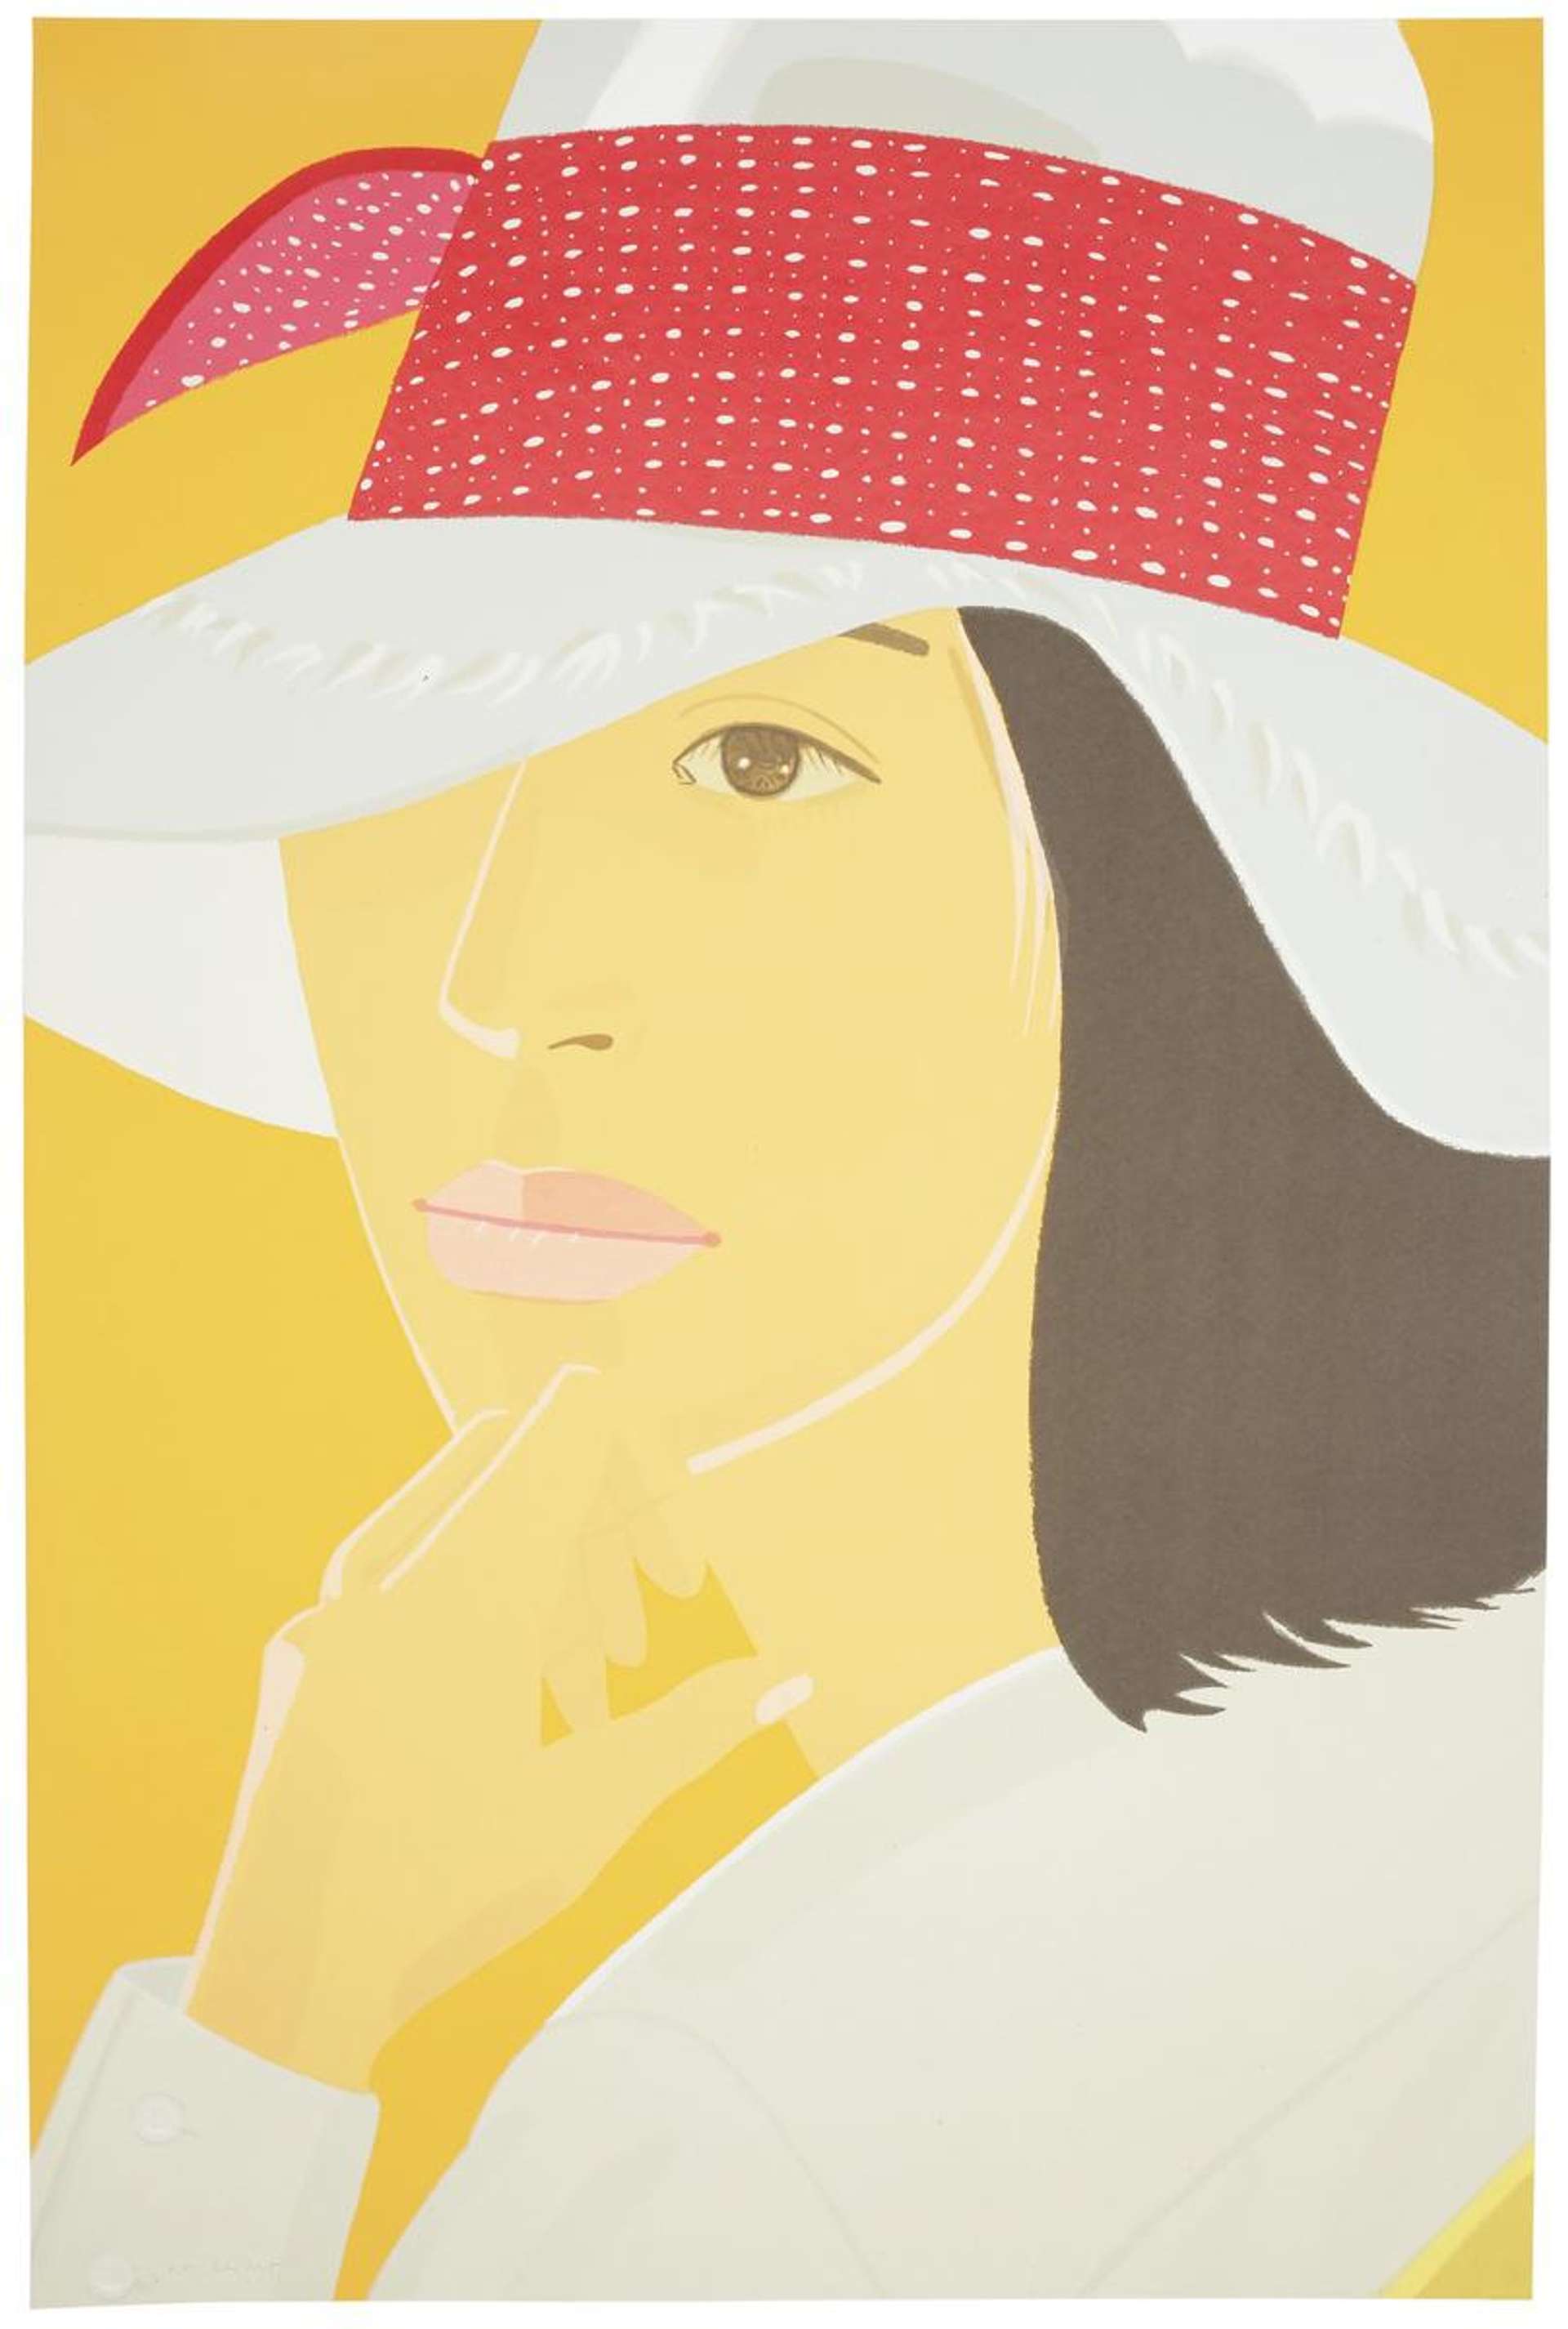 Alex Katz: The Red Band - Signed Print